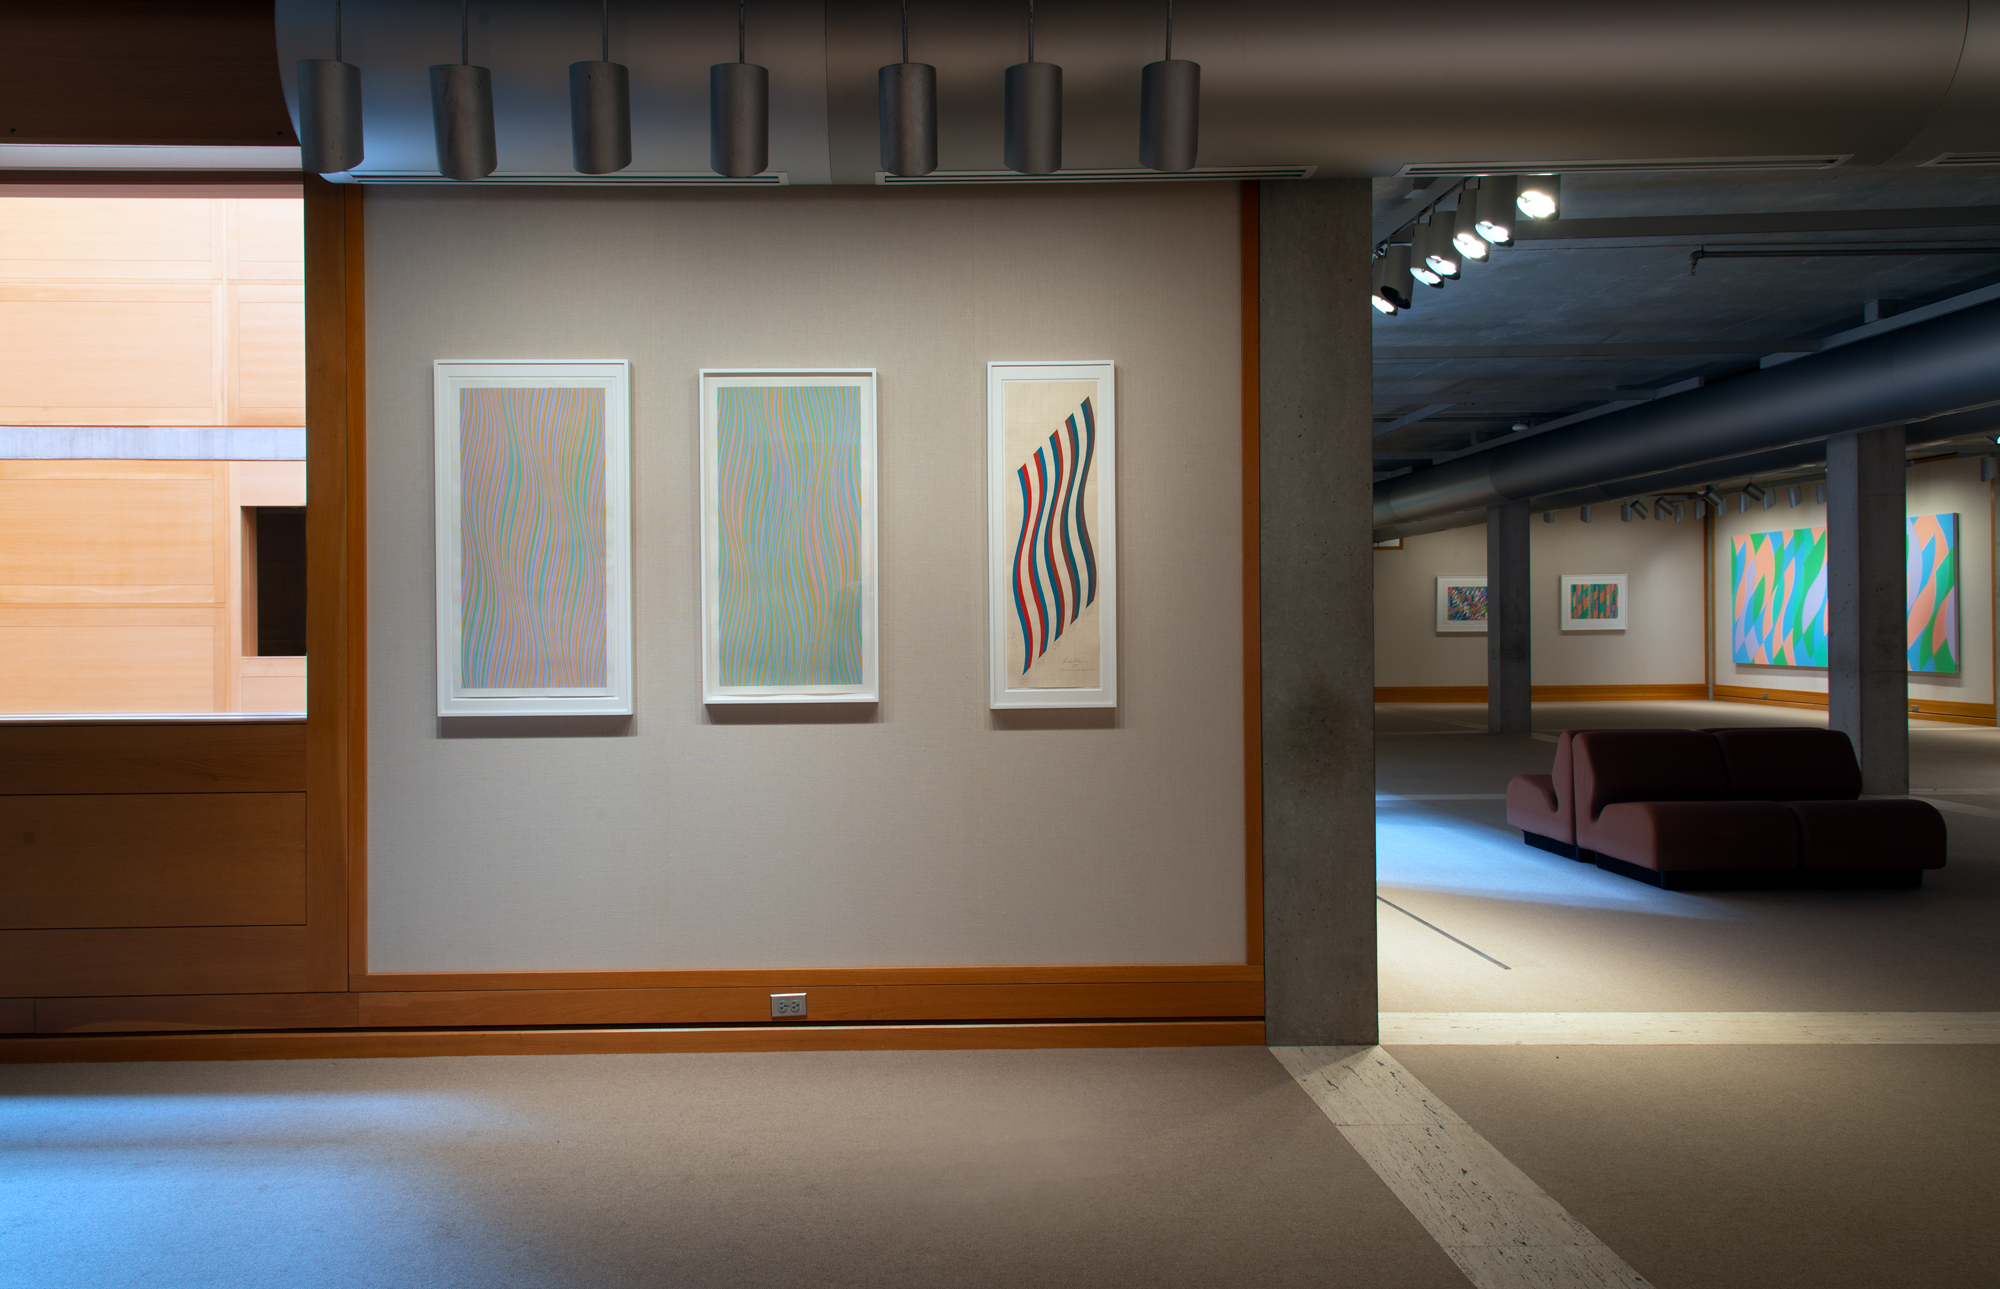 Works by Bridget Riley on view in the gallery.